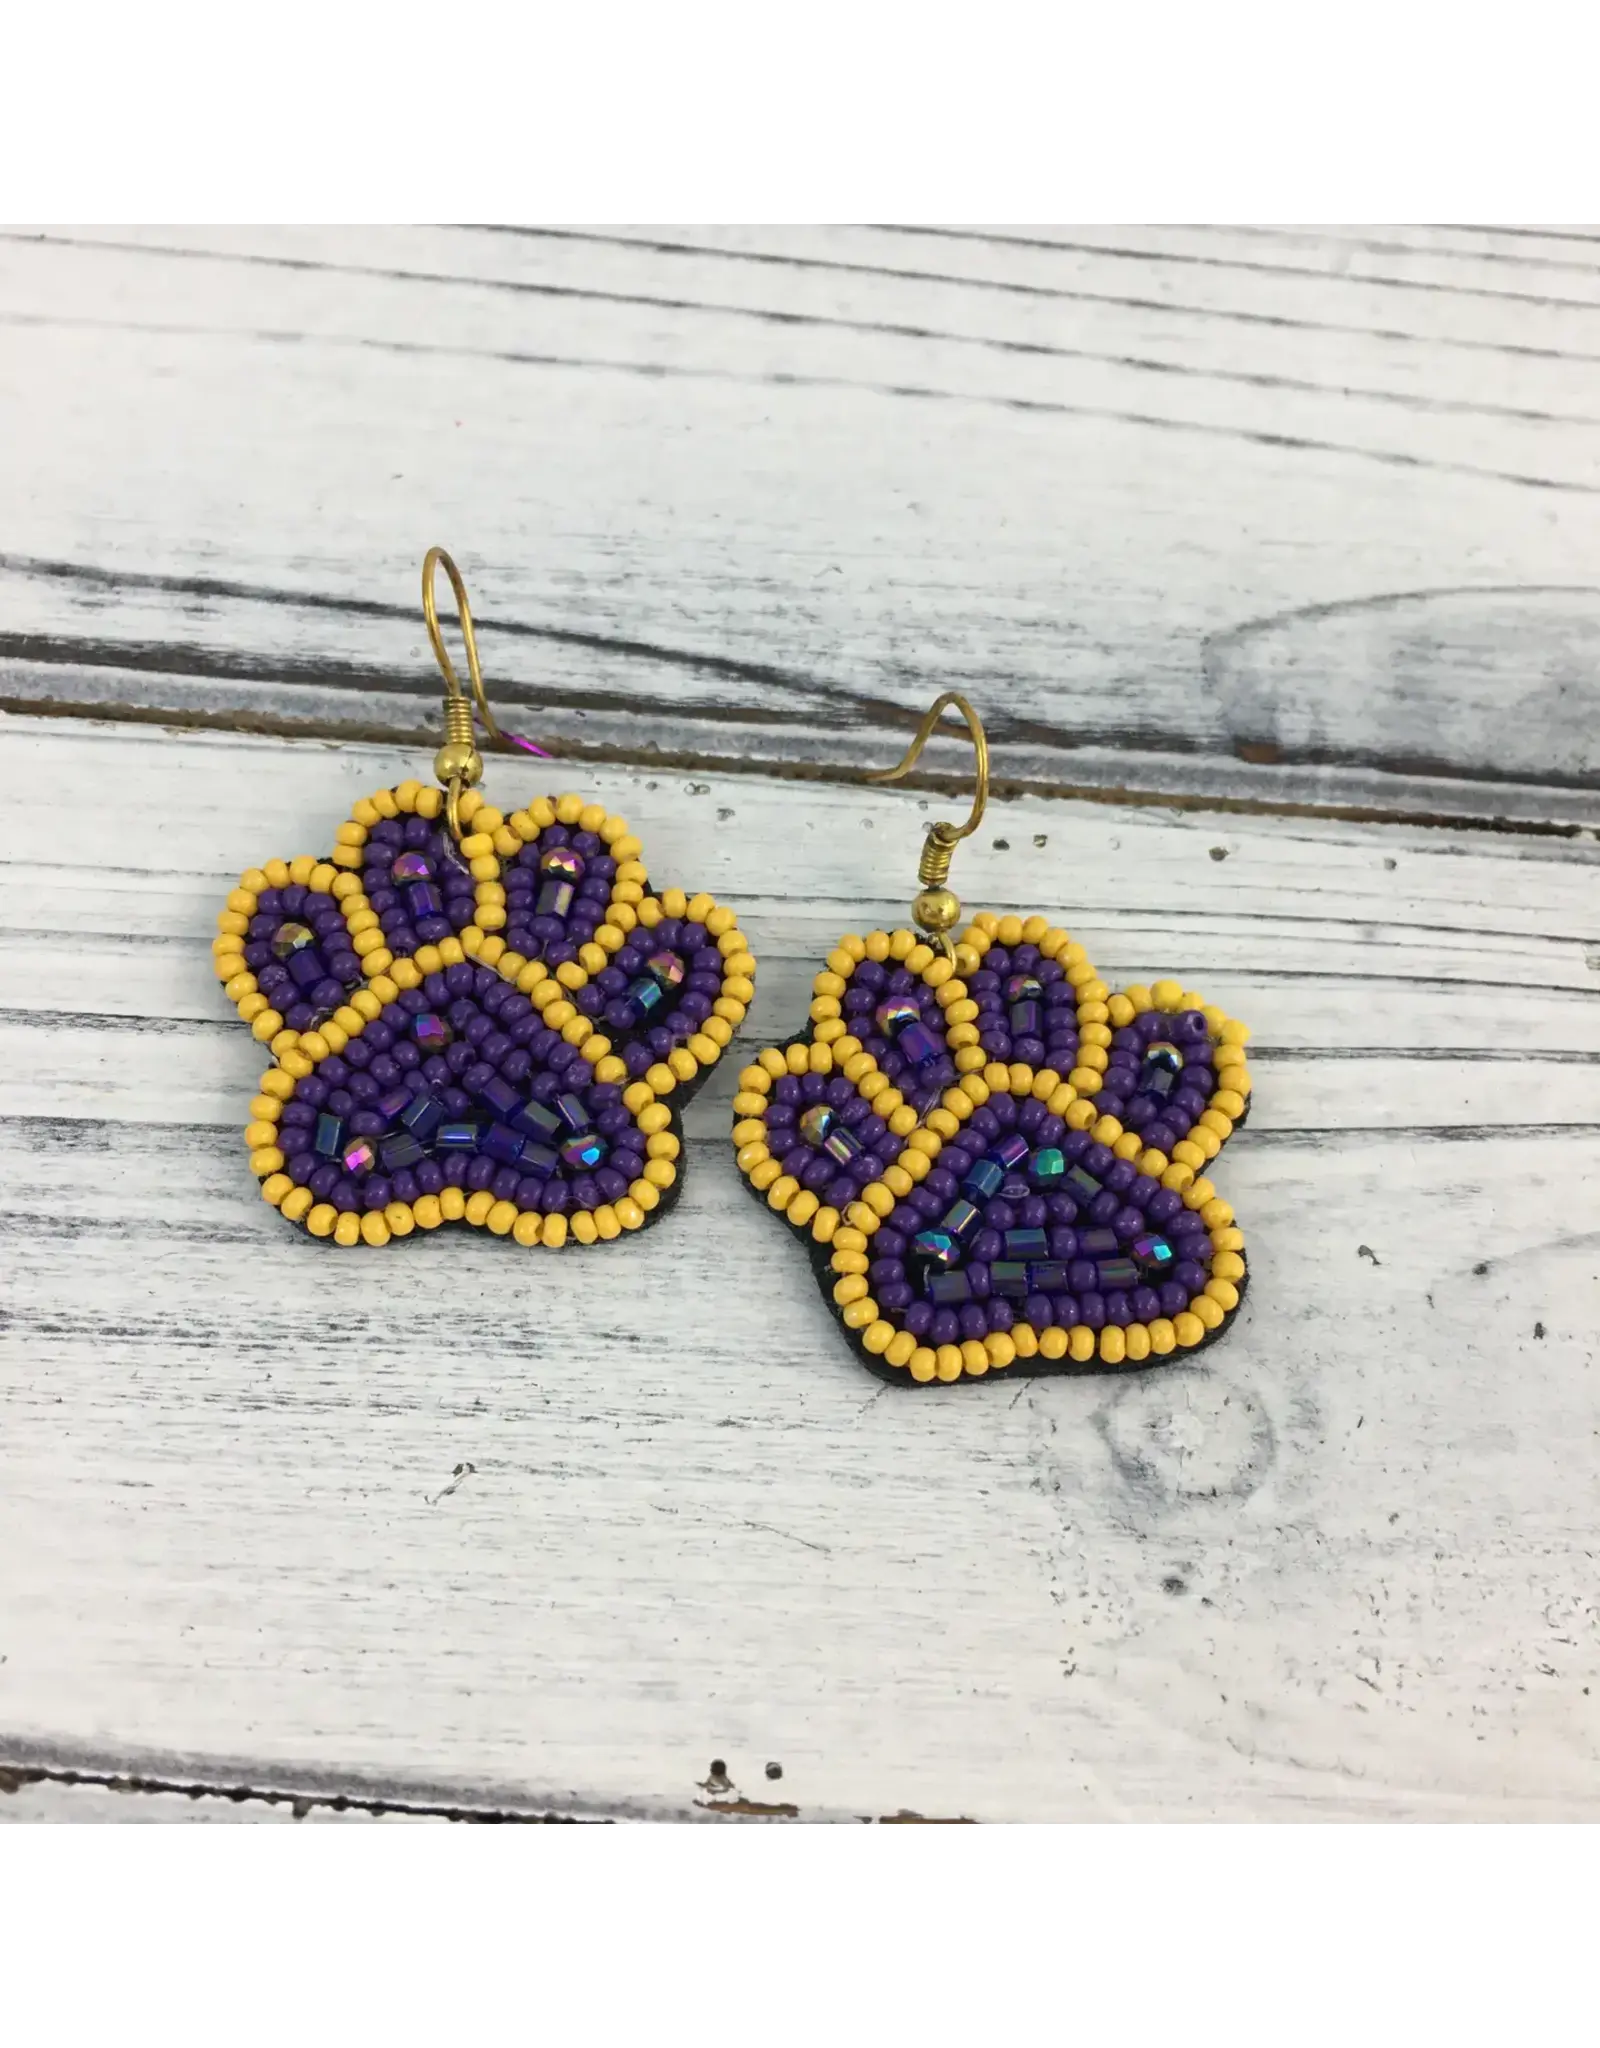 SongLily/Faire Purple and Gold Beaded Paw Earrings